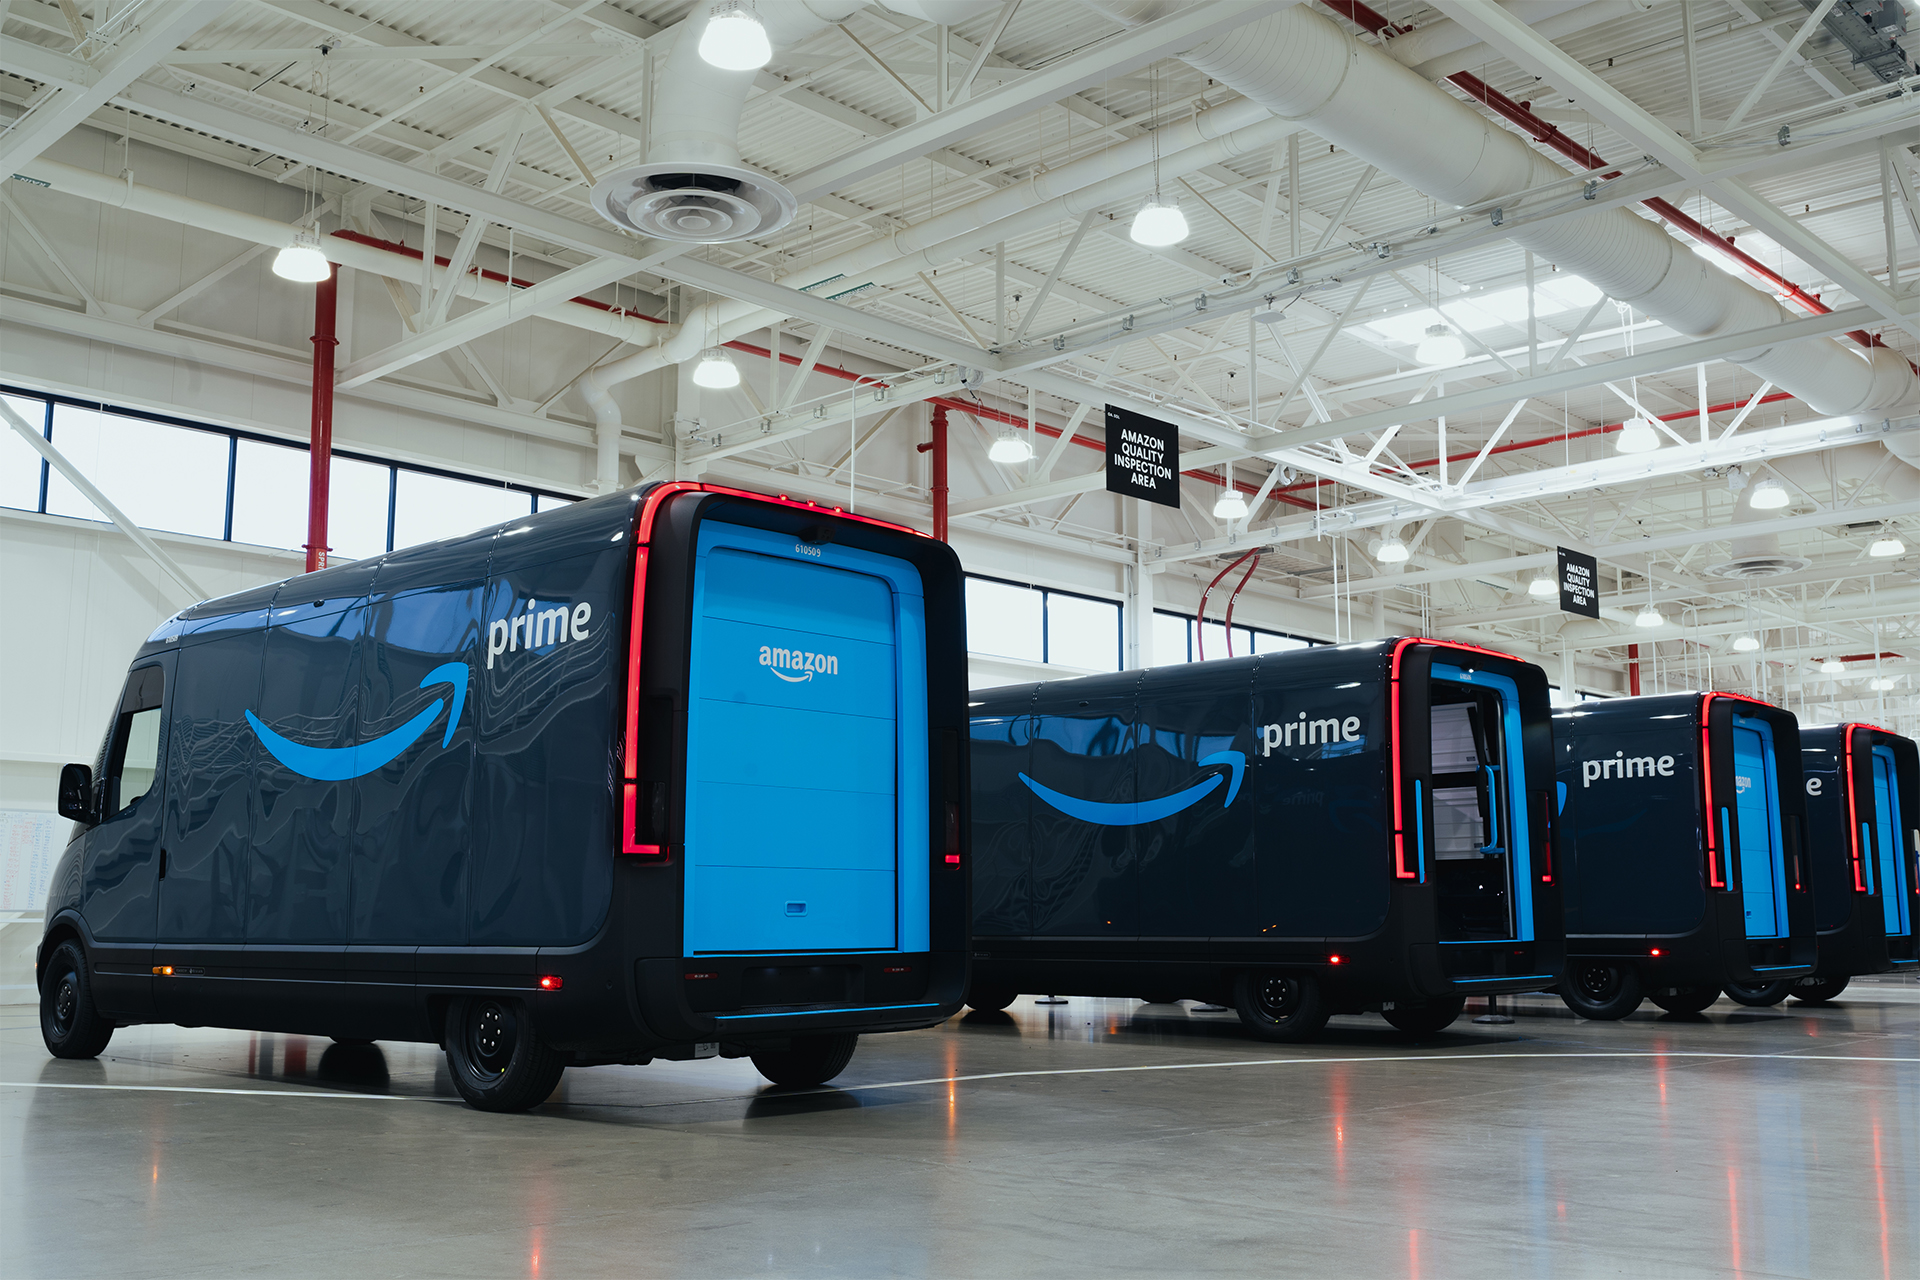 Amazon Starts Rolling Out Electric Vehicle Fleet HomePage News